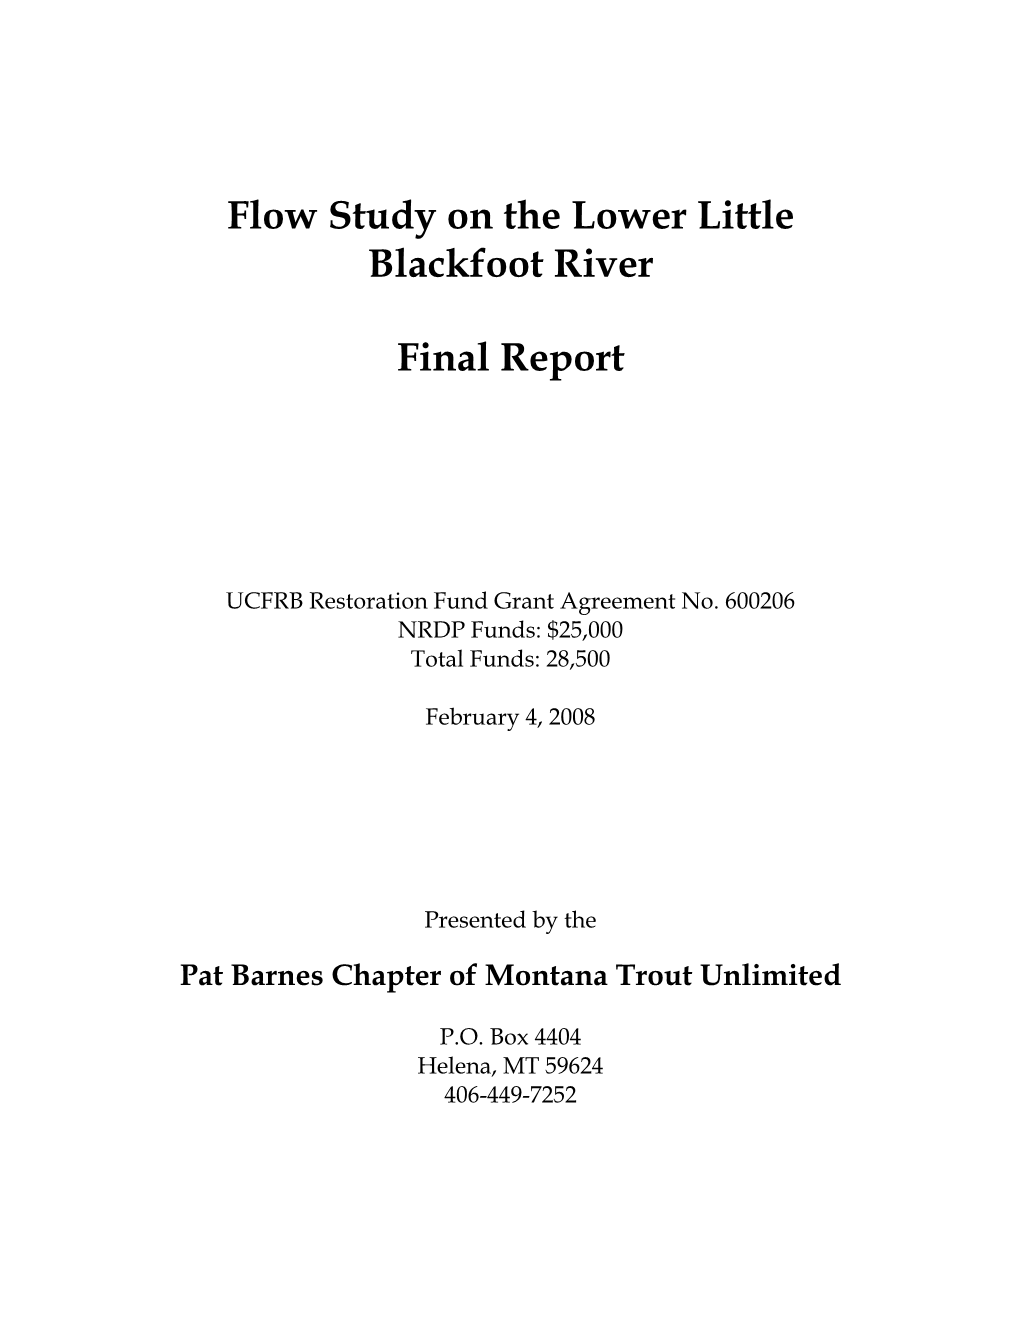 Flow Study on the Lower Little Blackfoot River